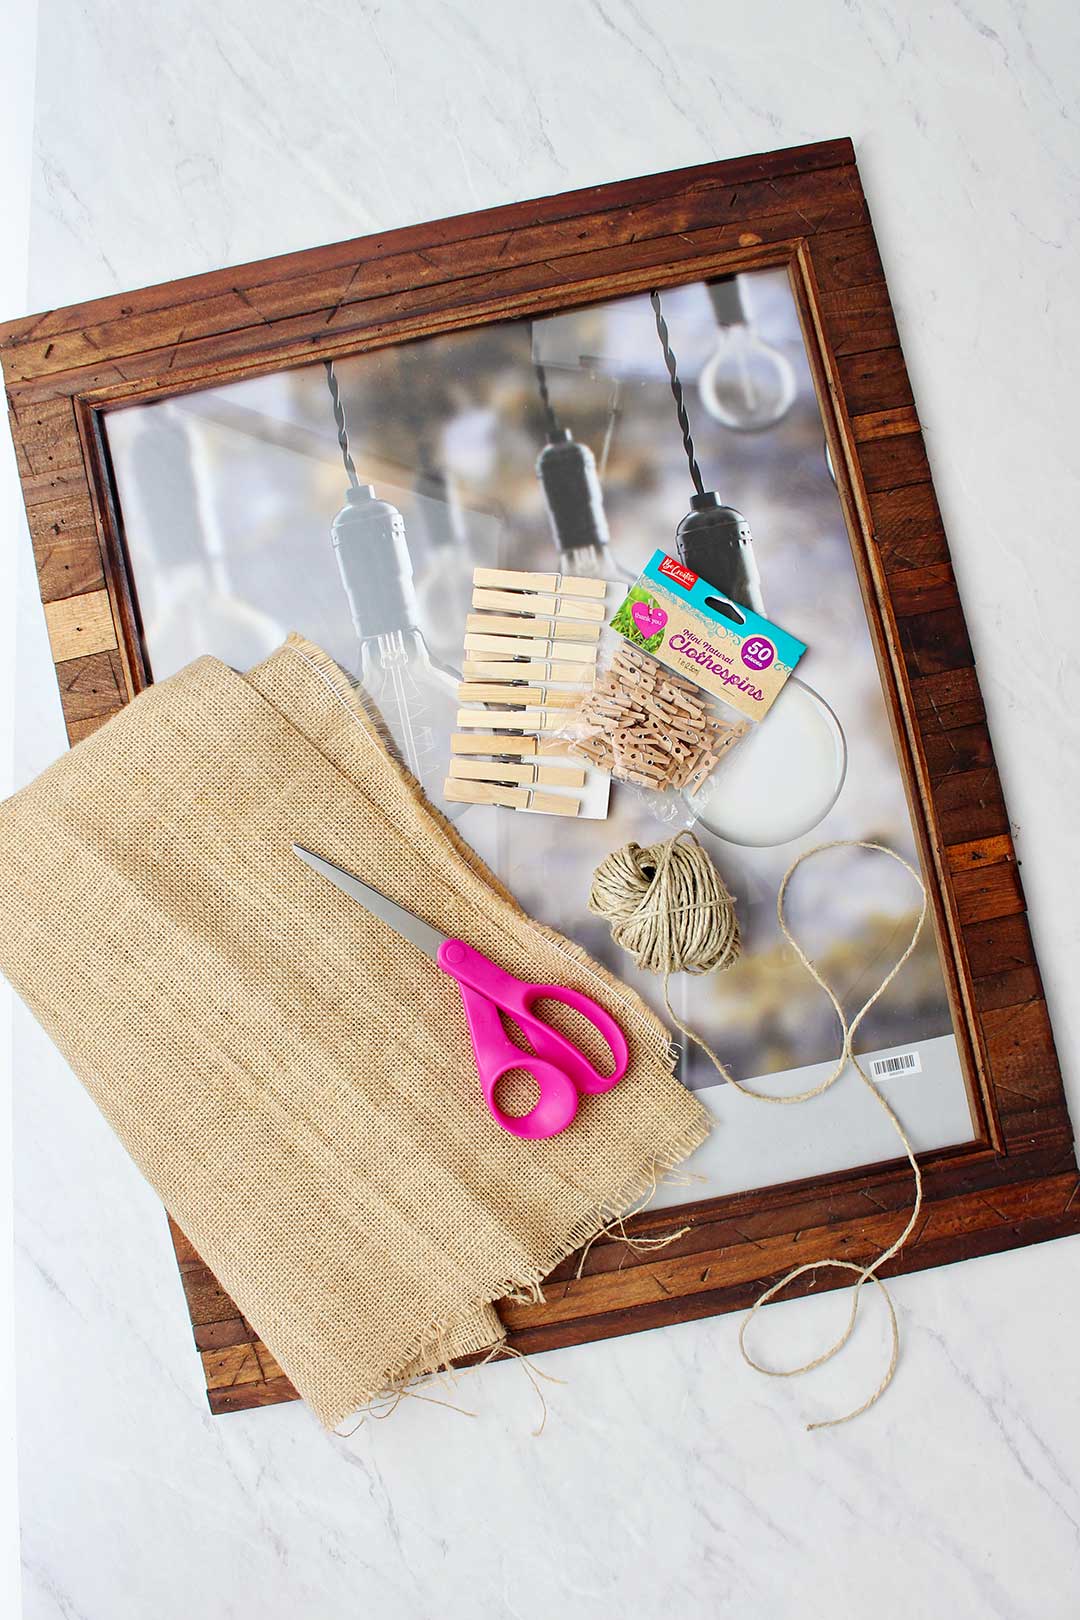 Large wooden photo frame, burlap, pink scissors, clothes pins and twine on marble counter top.